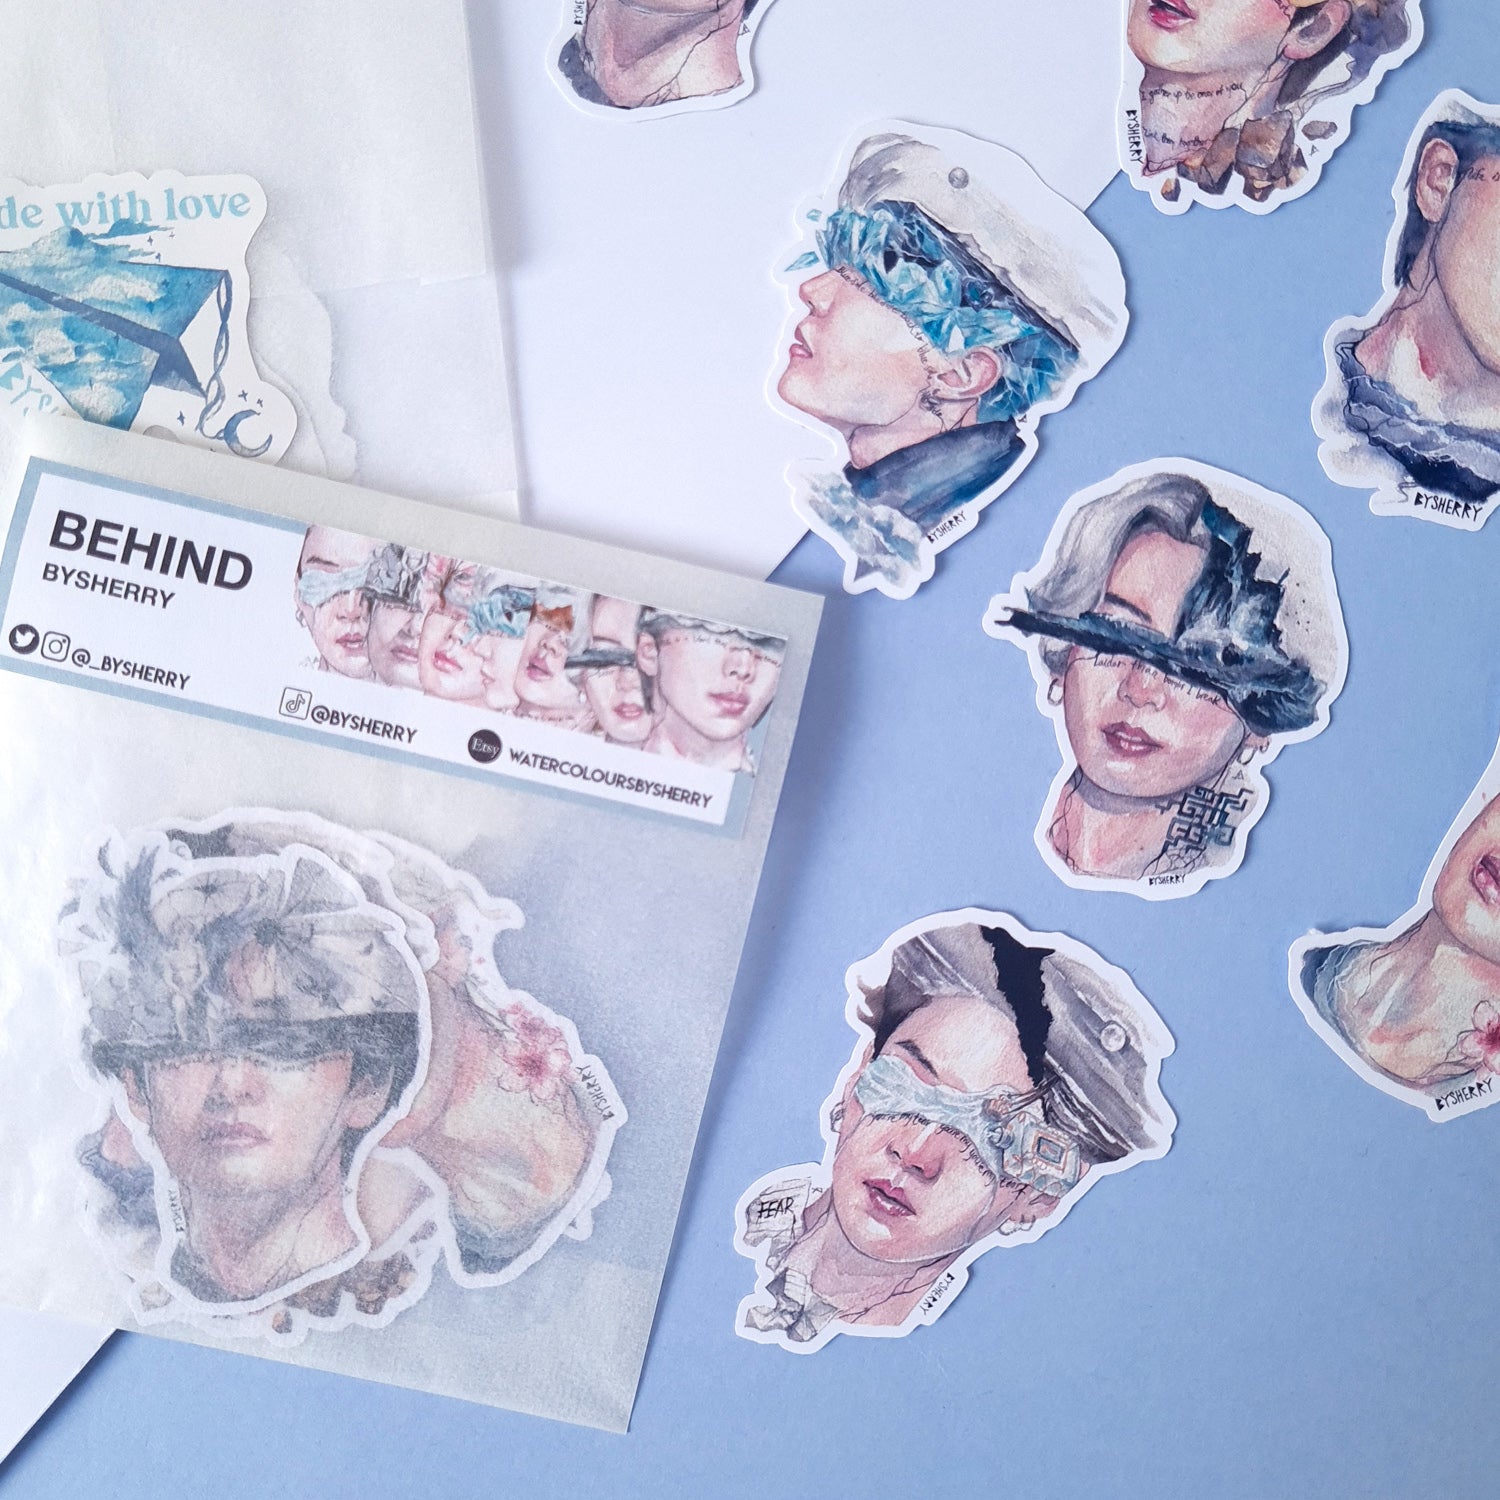 BTS Abstract Sticker Pack - Set of 7